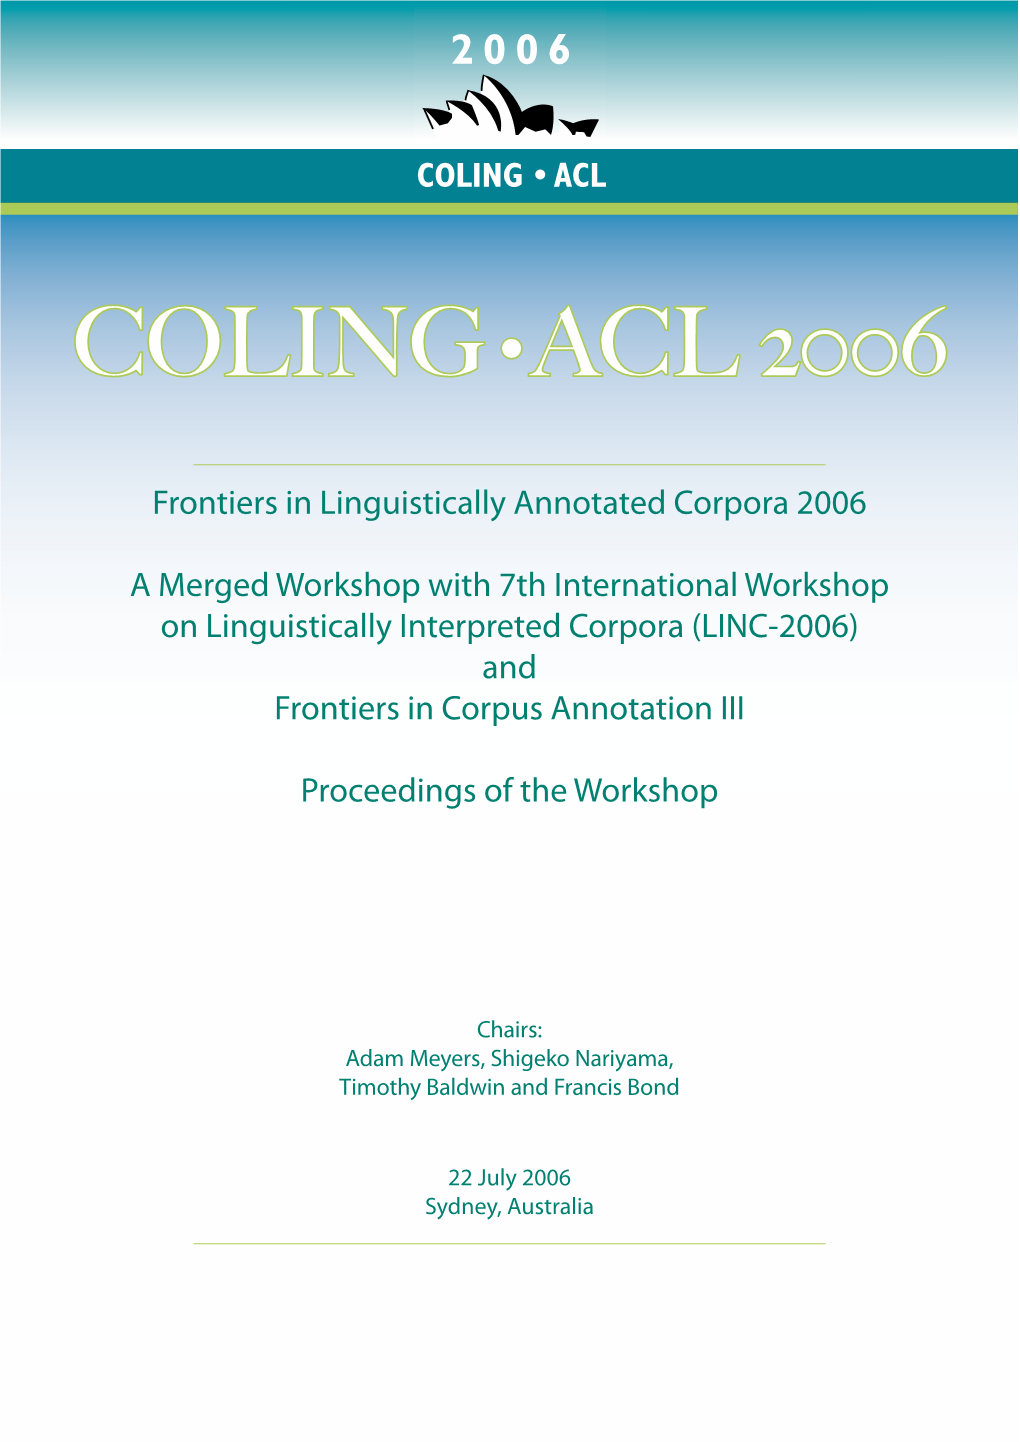 Proceedings of the Workshop on Frontiers in Linguistically Annotated Corpora 2006, Pages 1–4, Sydney, July 2006